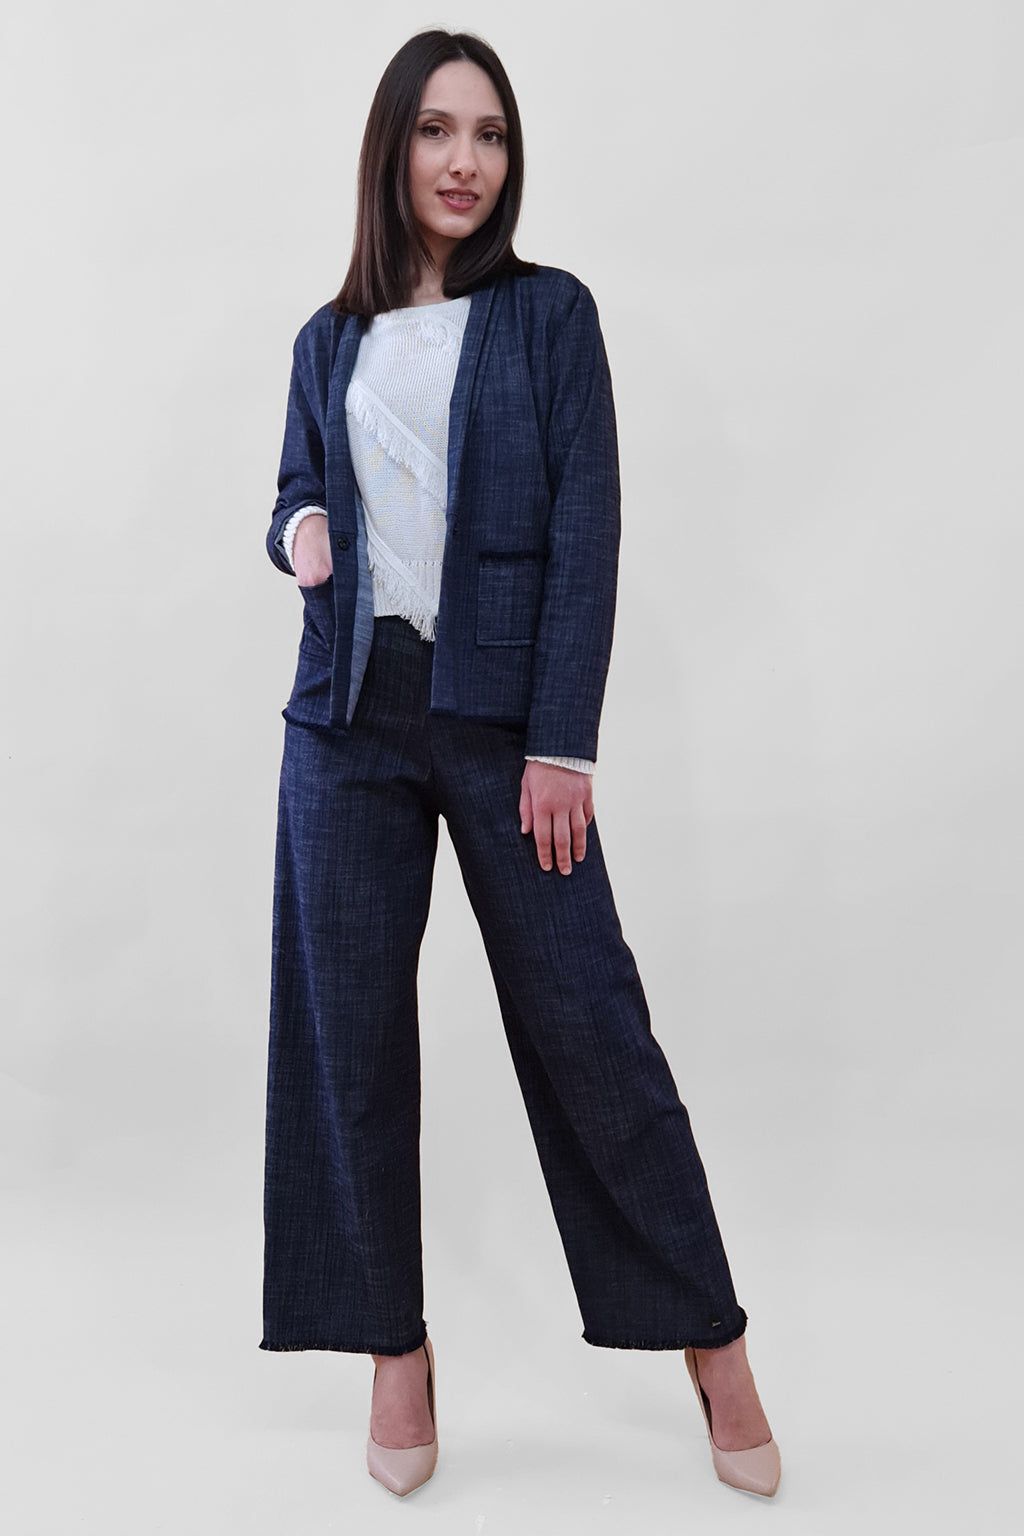 Woman wearing a navy blue pantsuit with a white blouse and beige heels